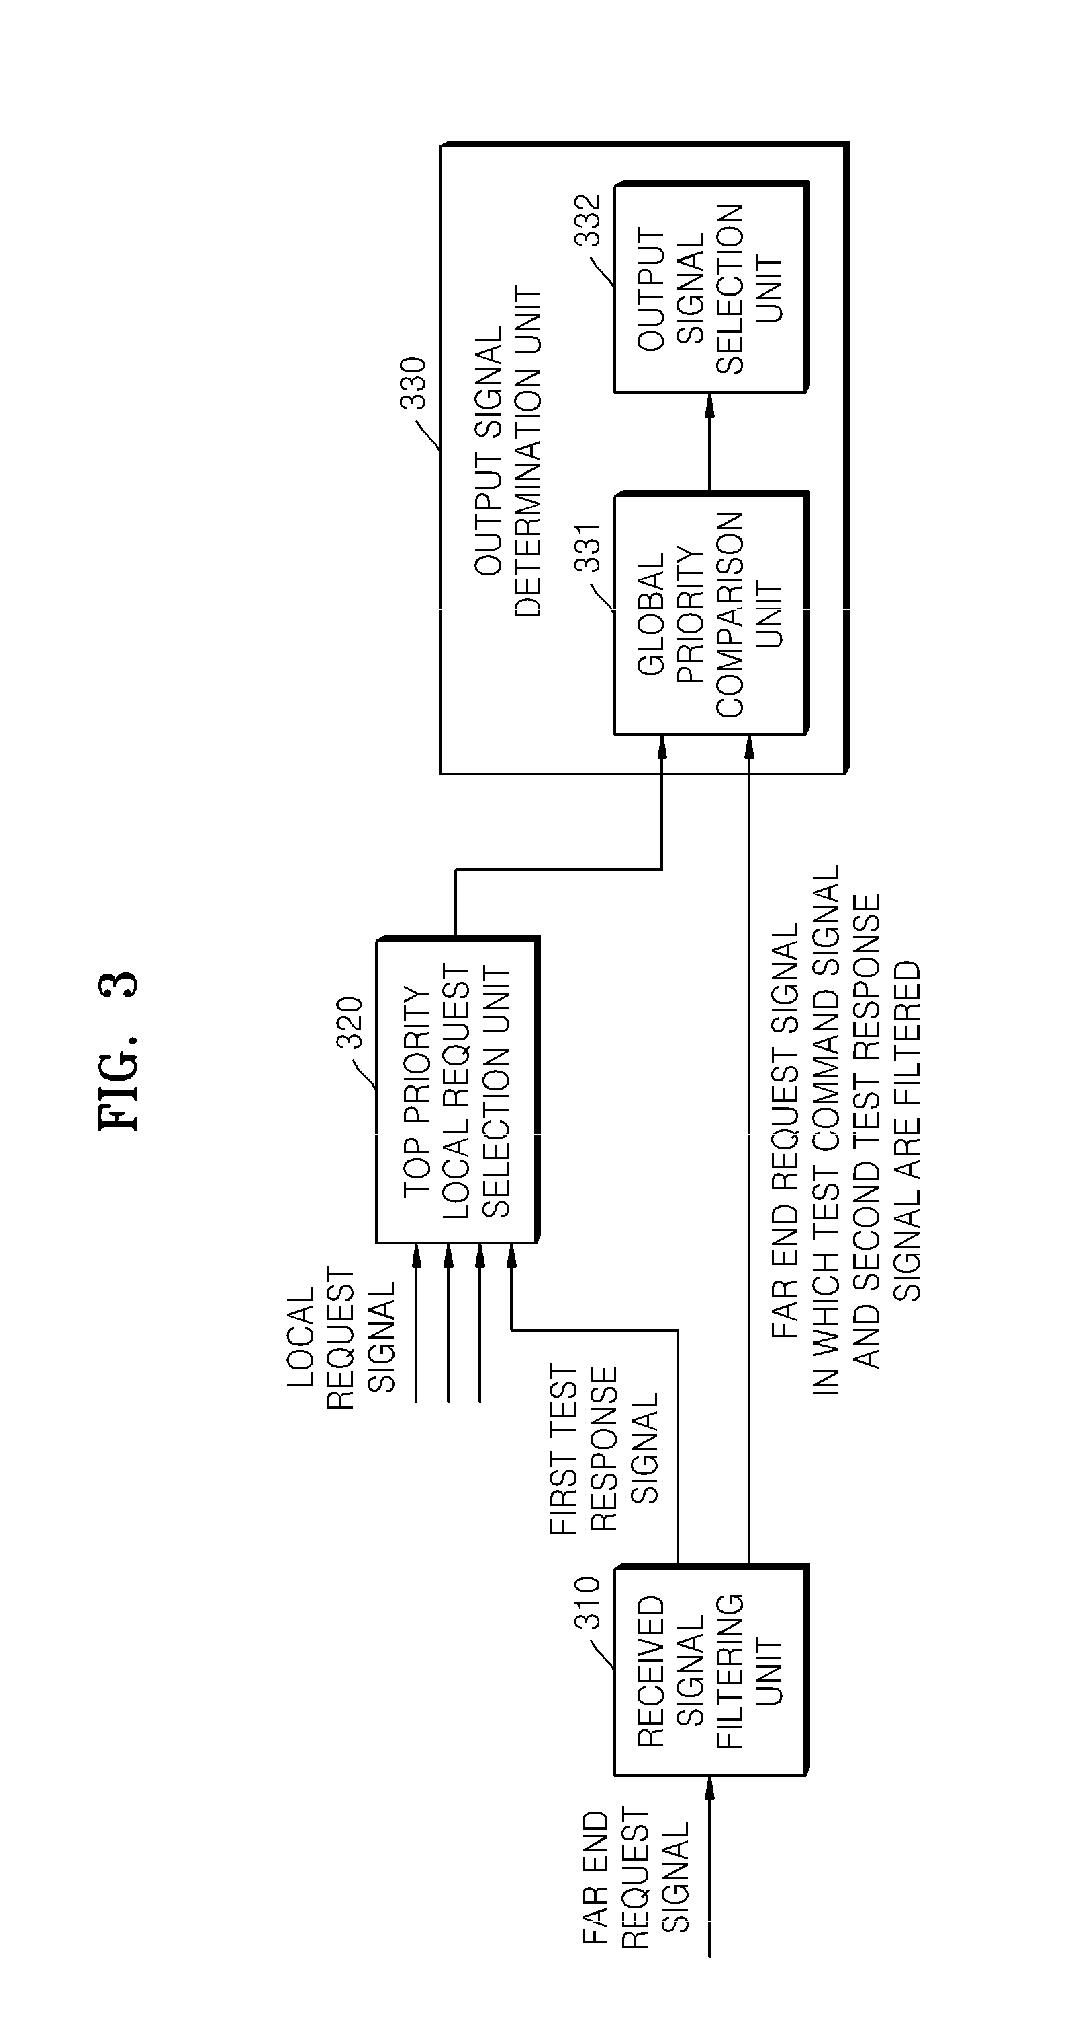 Operational status testing apparatus and method for ethernet-based automatic protection switching process